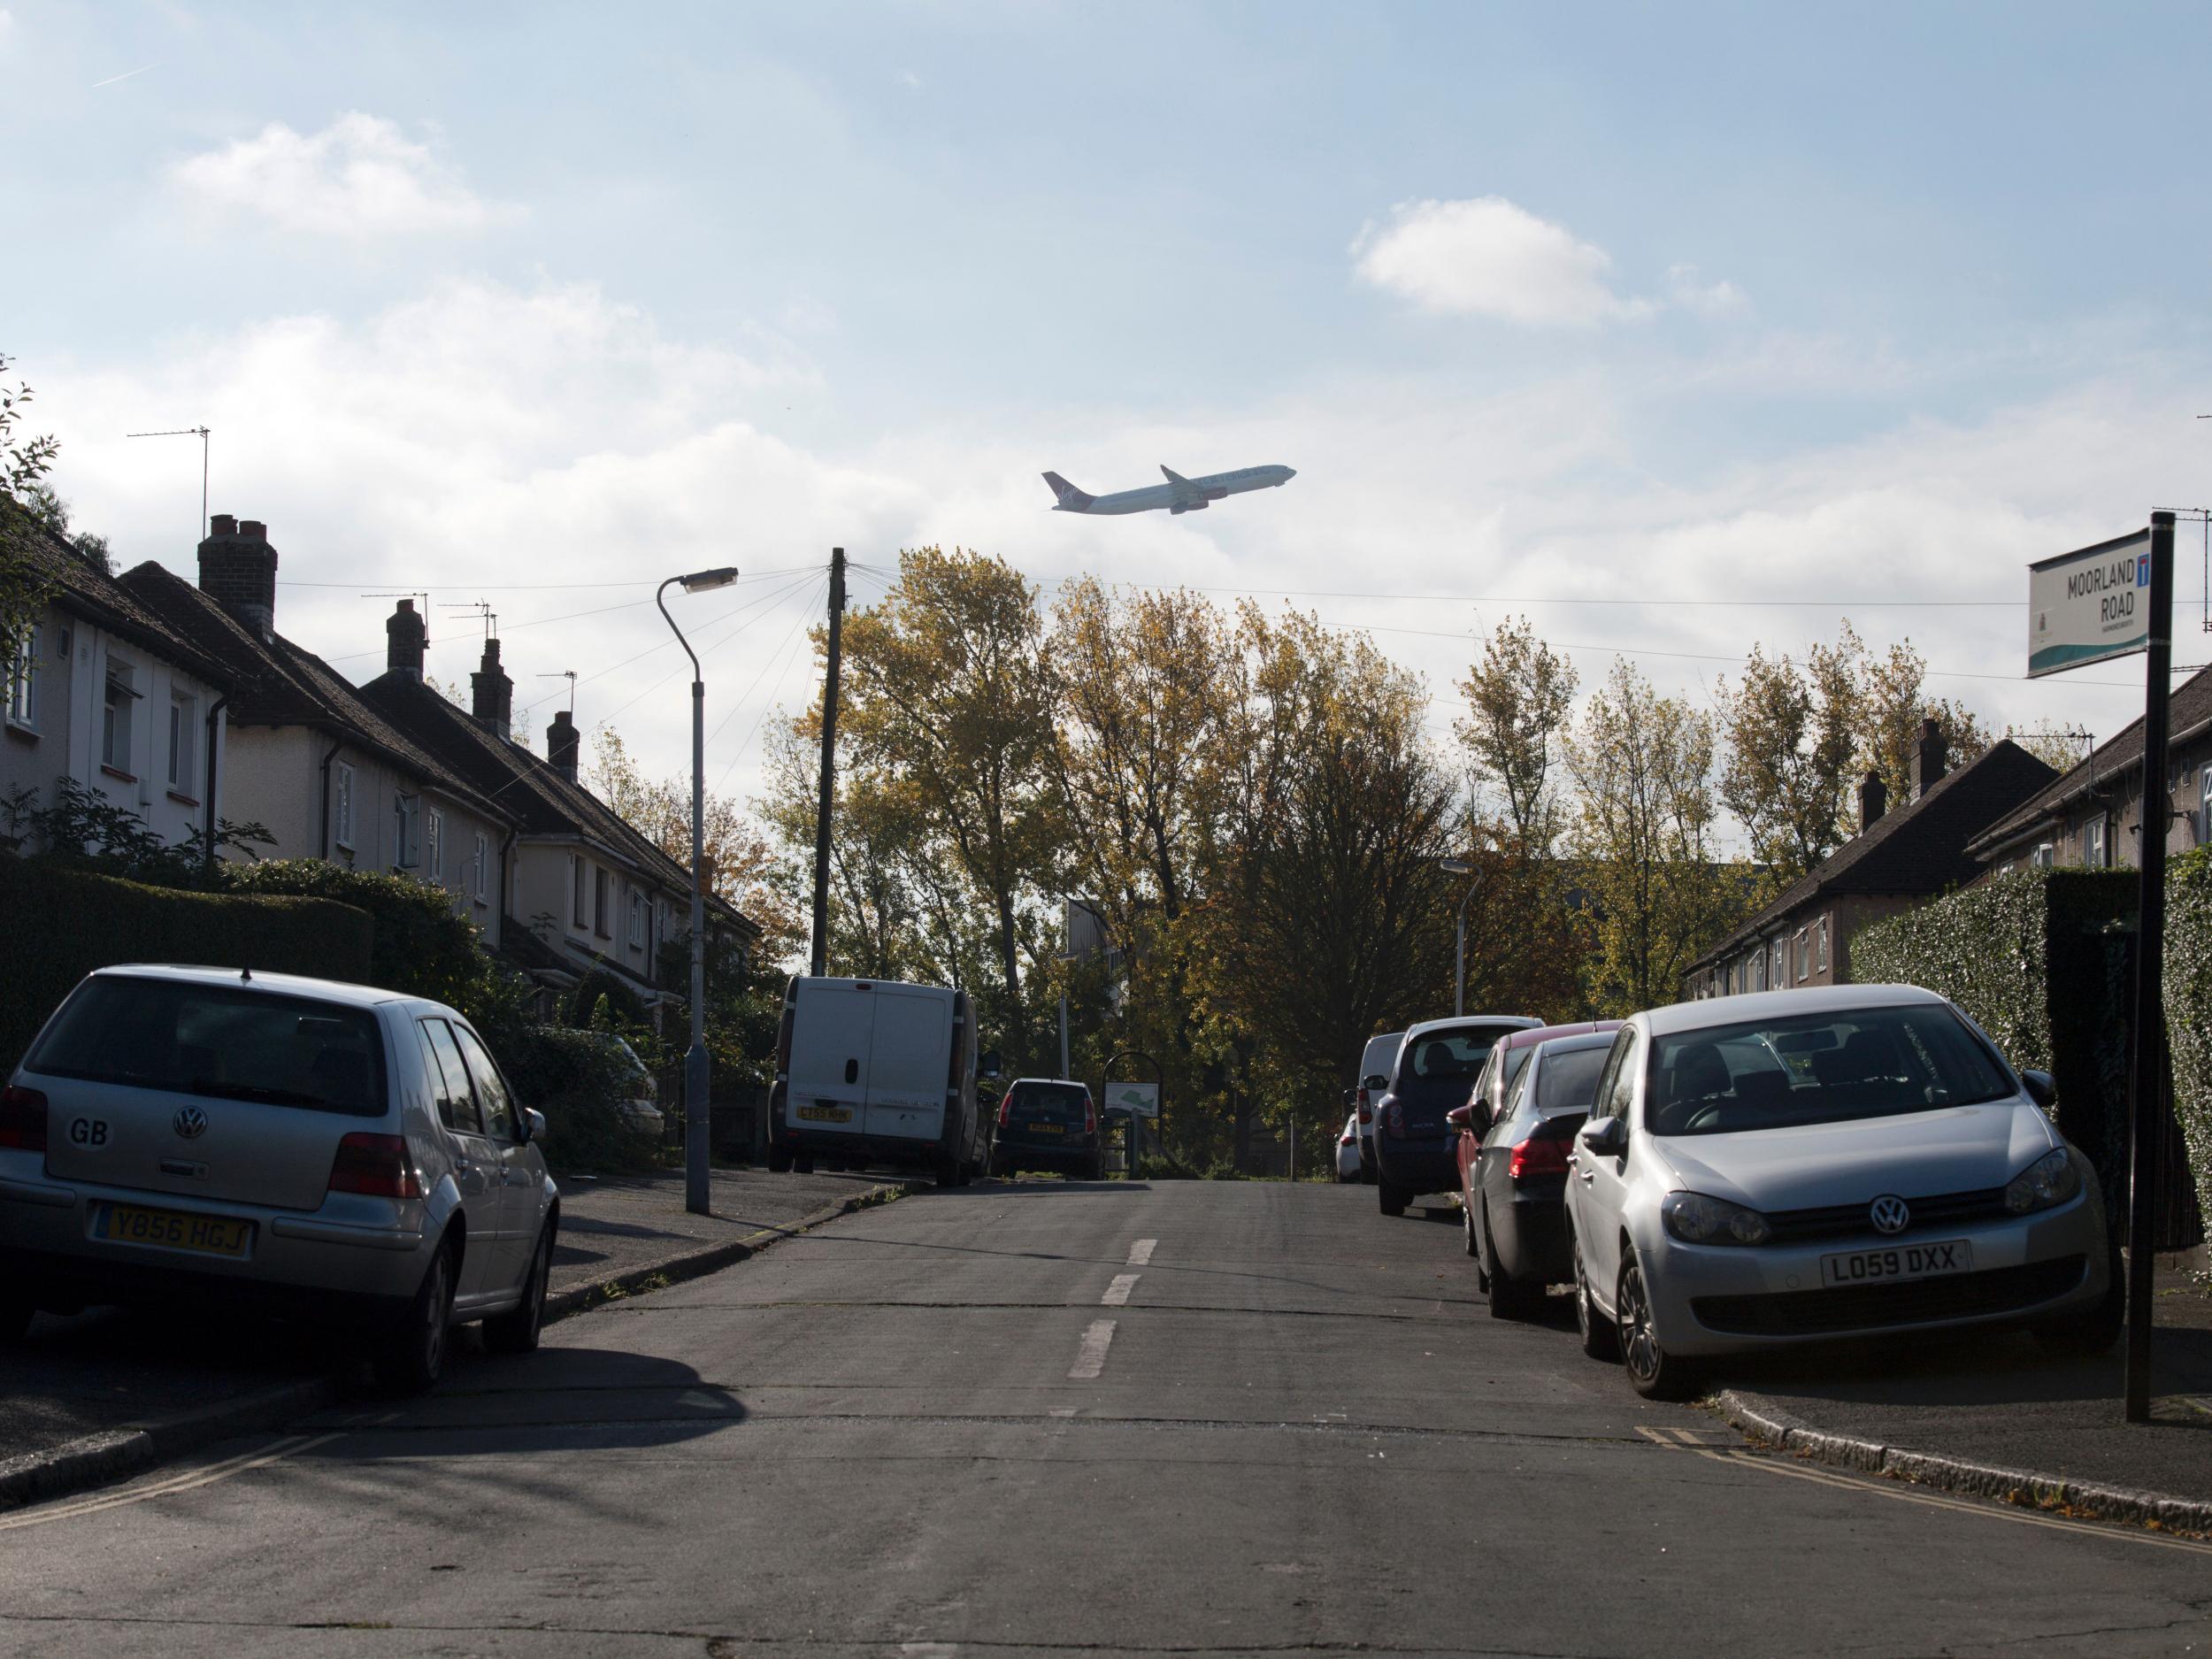 These flights disturb the peace of millions, disrupting lessons across west London and dumping toxic gases on people living around the airport